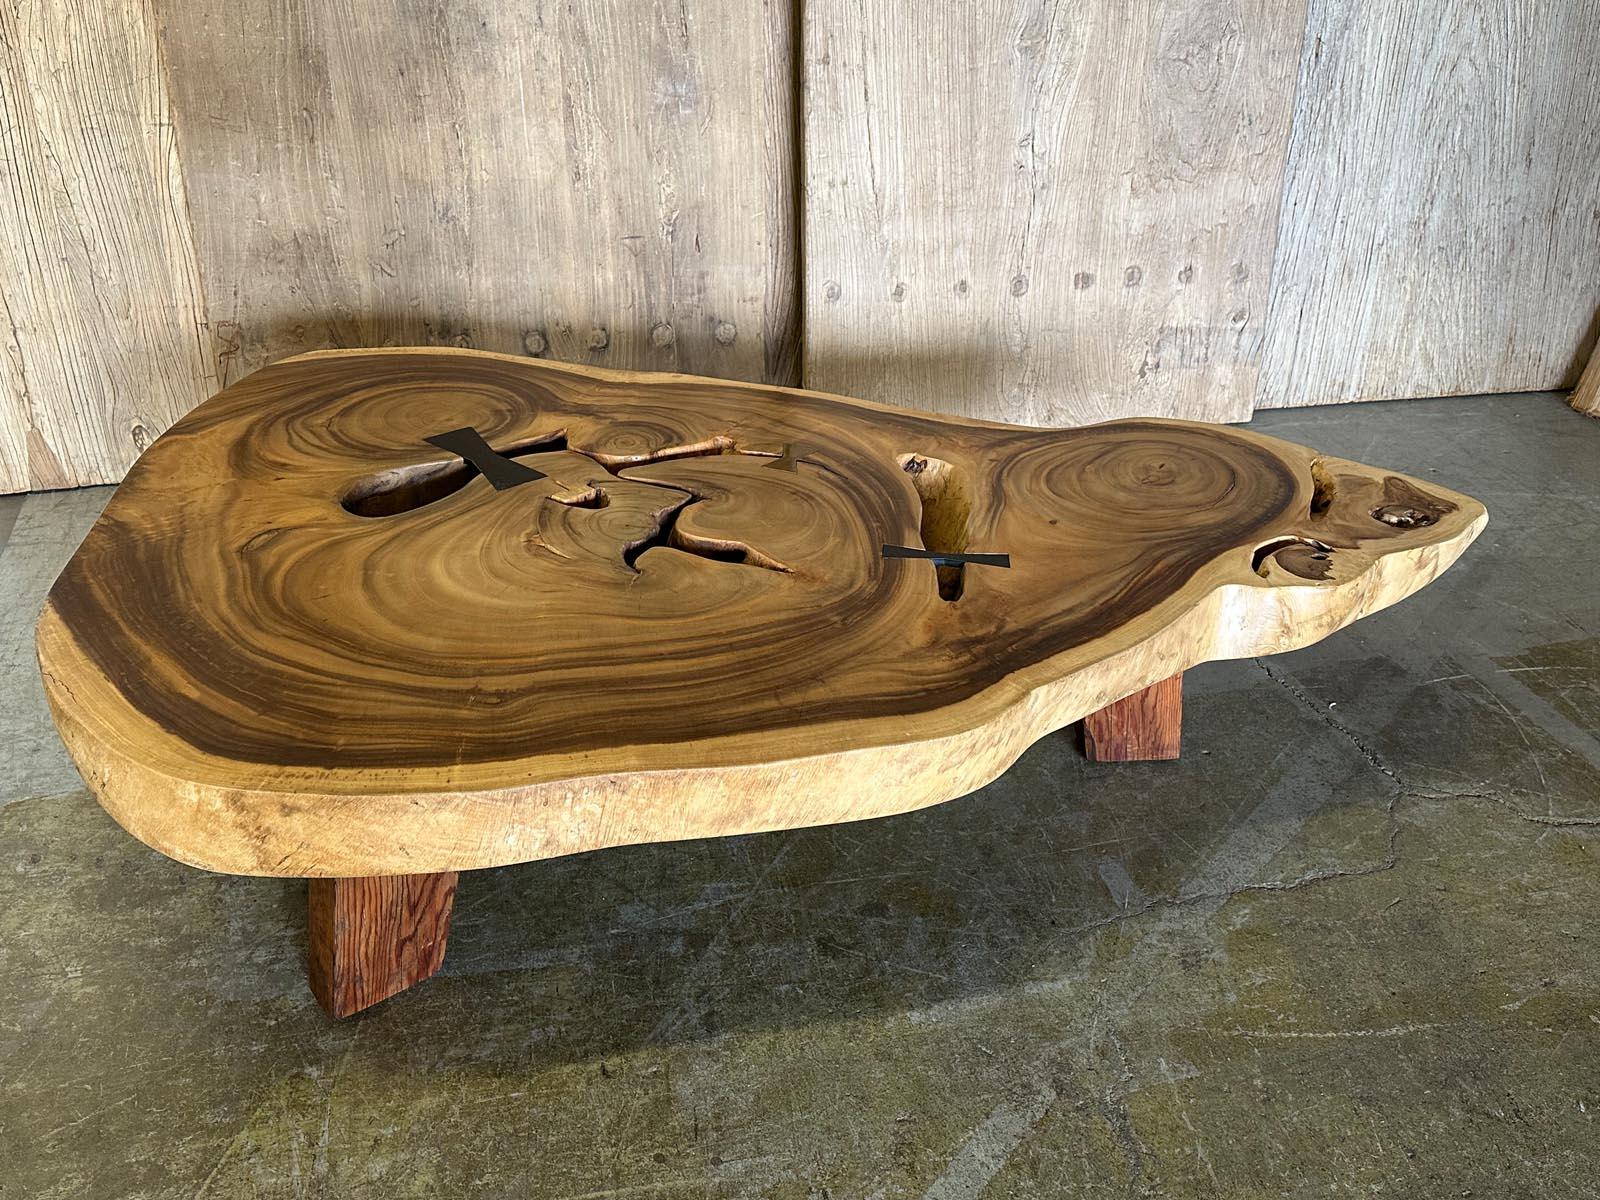 This coffee table consists of a freeform slab of Albezia wood which showcases a range of beautiful colors and tones. We added an iron mariposa, butterfly. Great thick top and solid construction makes for a sturdy, yet elegant coffee table